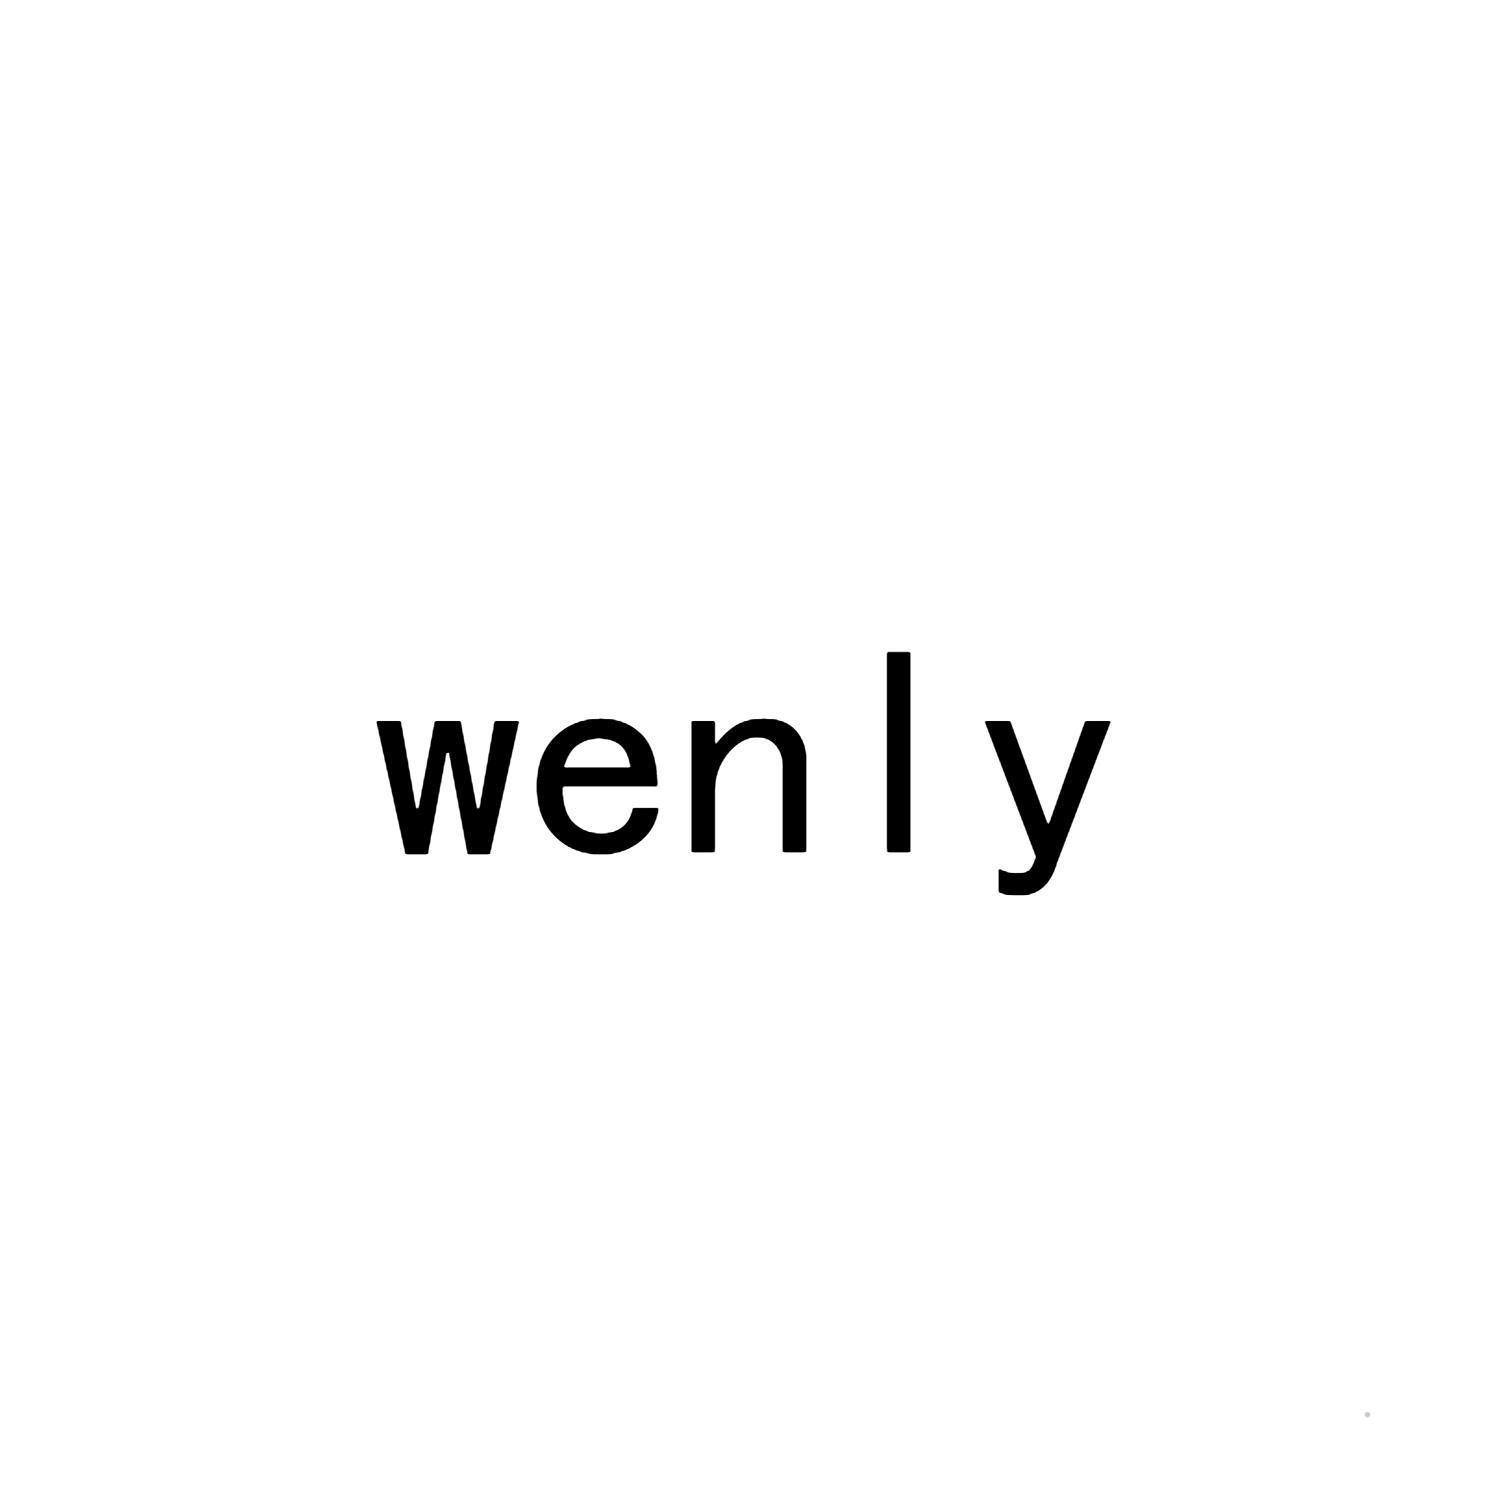 WENLY